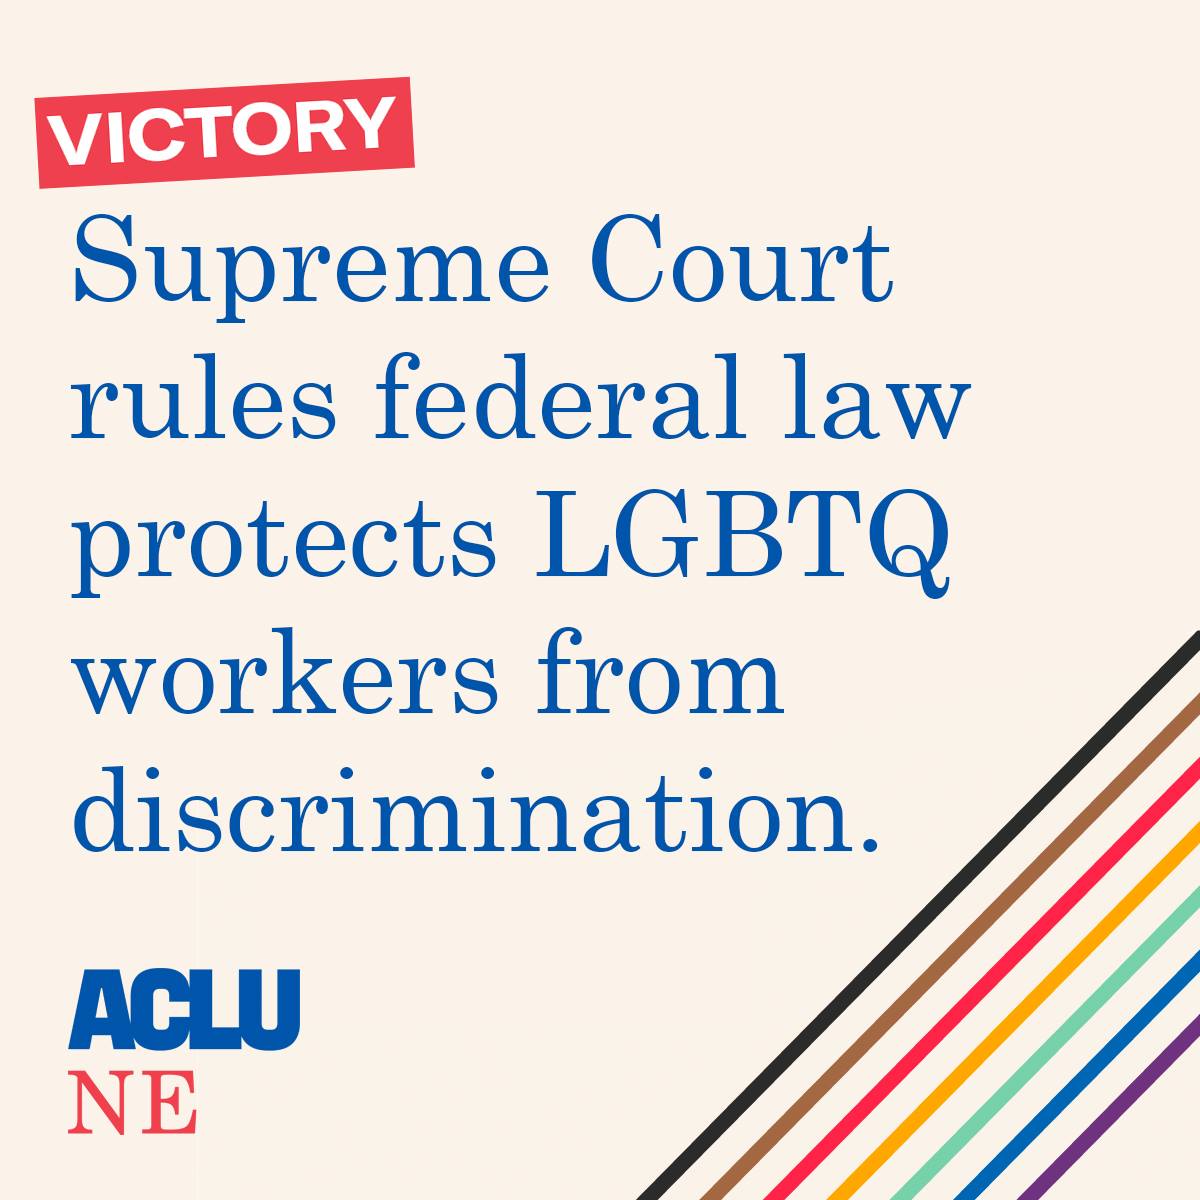 "Victory: Supreme Court rules federal law protects LGBTQ workers from discrimination" written across a pale peach background 